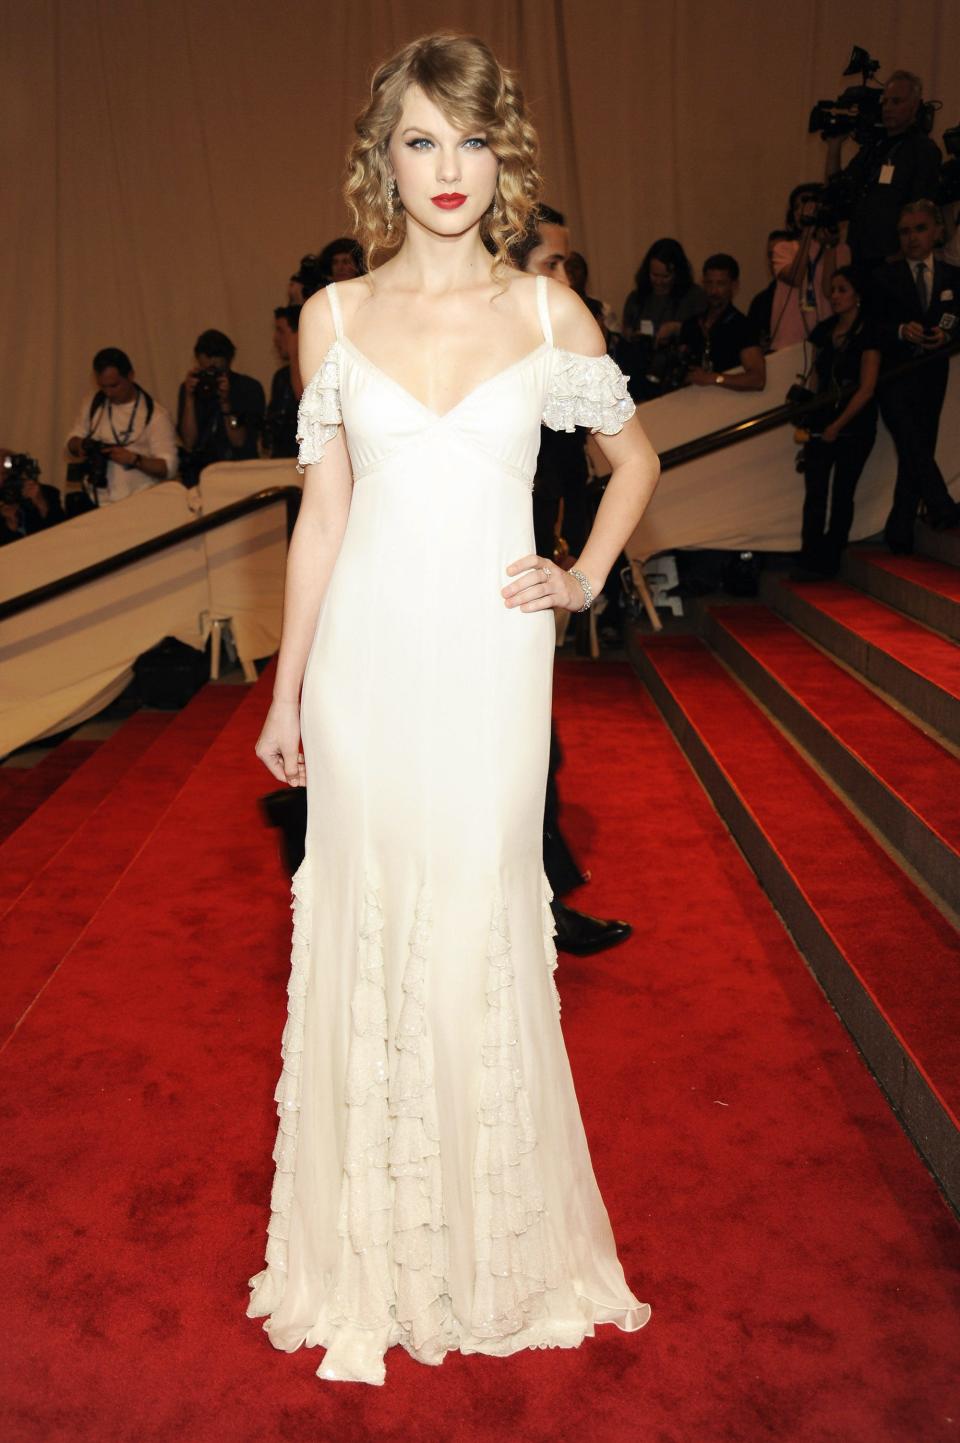 Taylor Swift wears a white dress on the Met Gala red carpet.